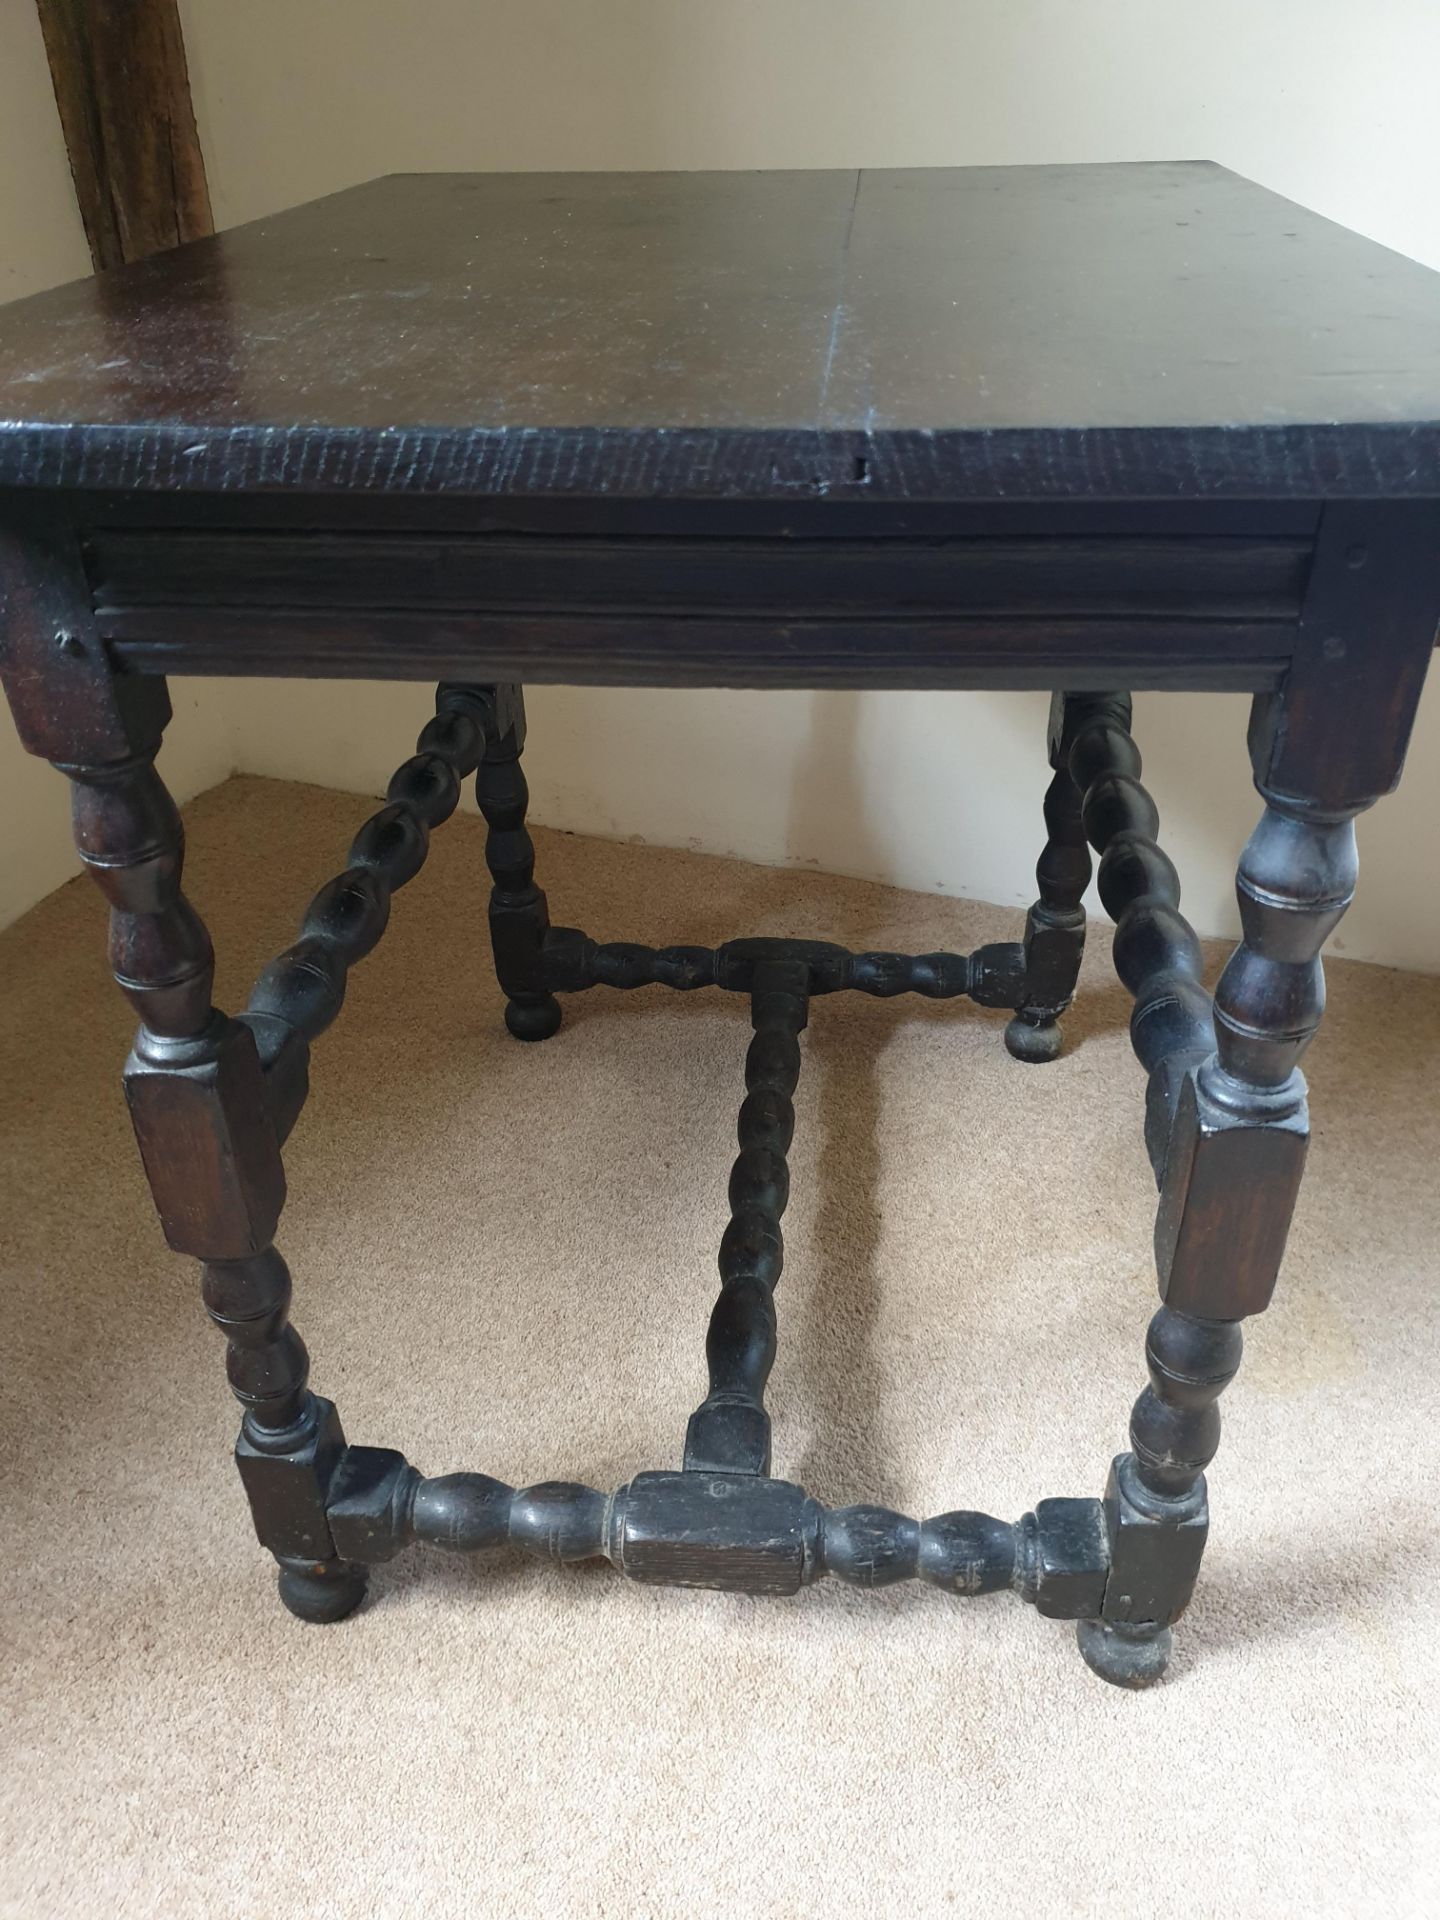 Antique Furniture 17c Table With Bobbin Turned Legs - Image 2 of 7